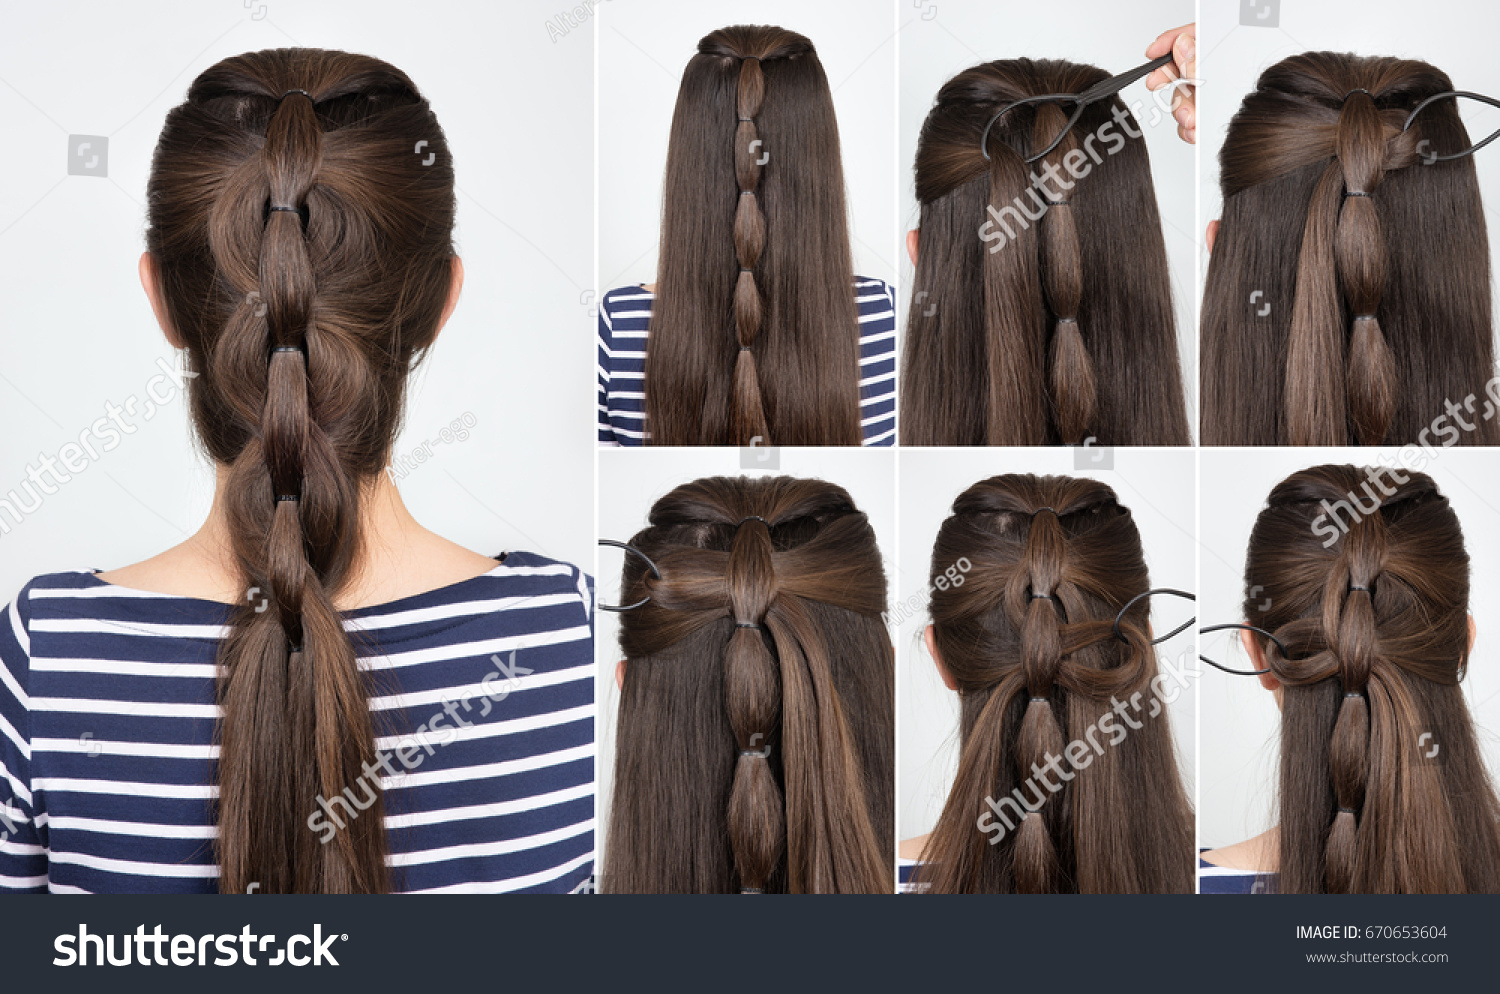 50,460 Simple hairstyle Images, Stock Photos & Vectors | Shutterstock